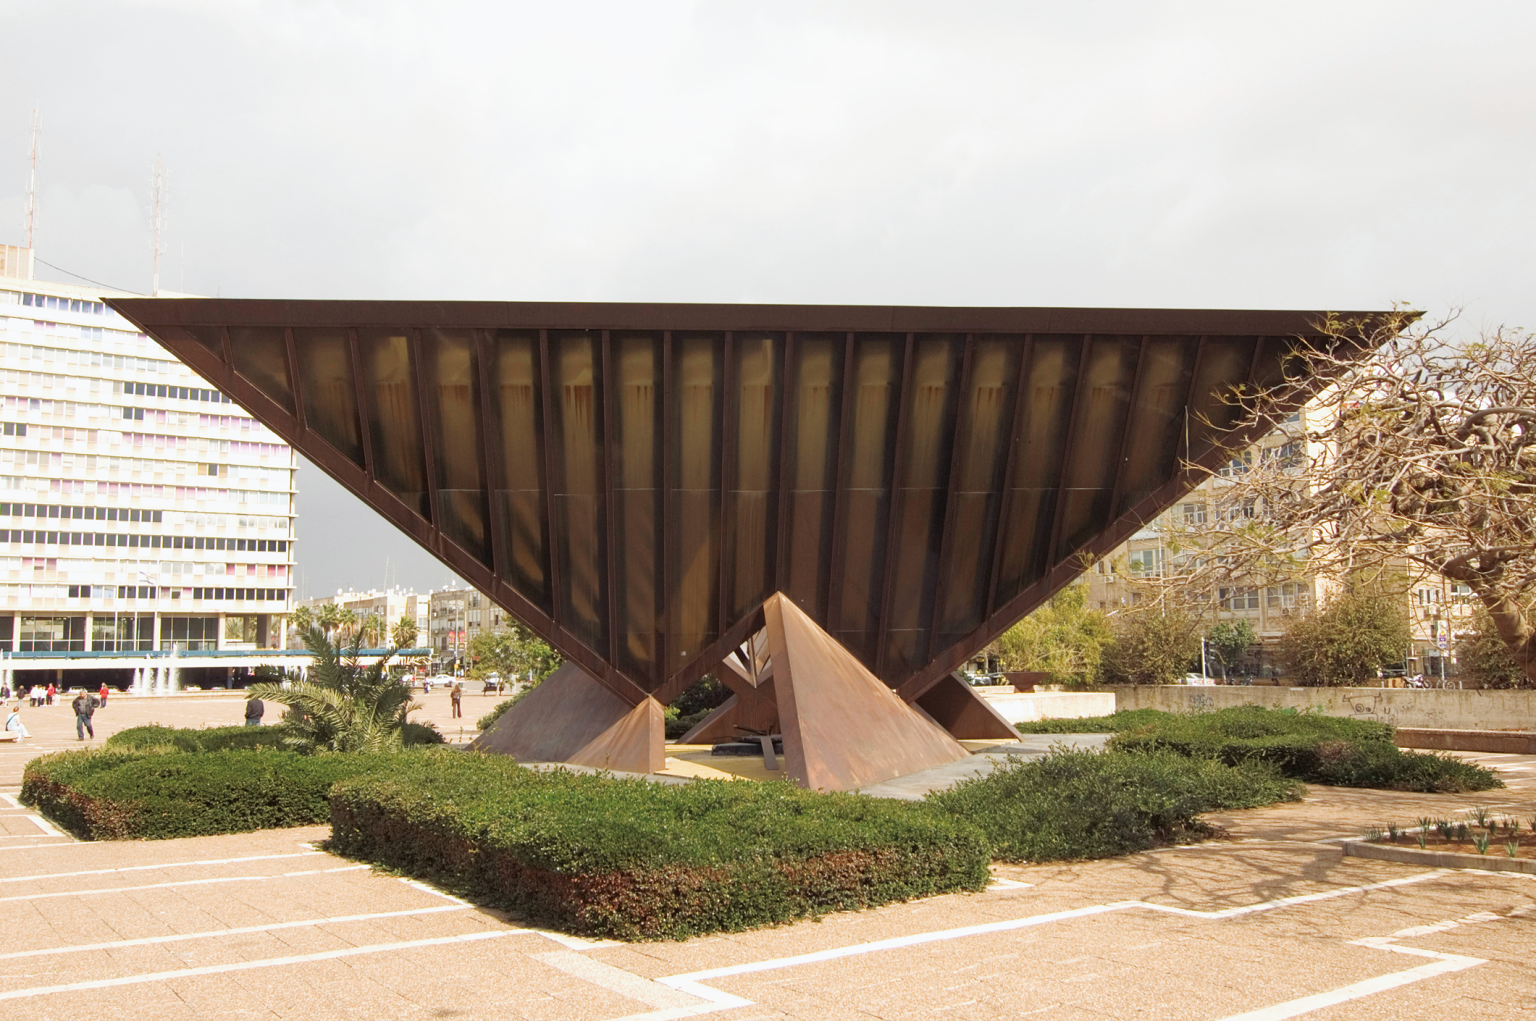 Photograph of inverted pyramid sculpture in the middle of a city square.